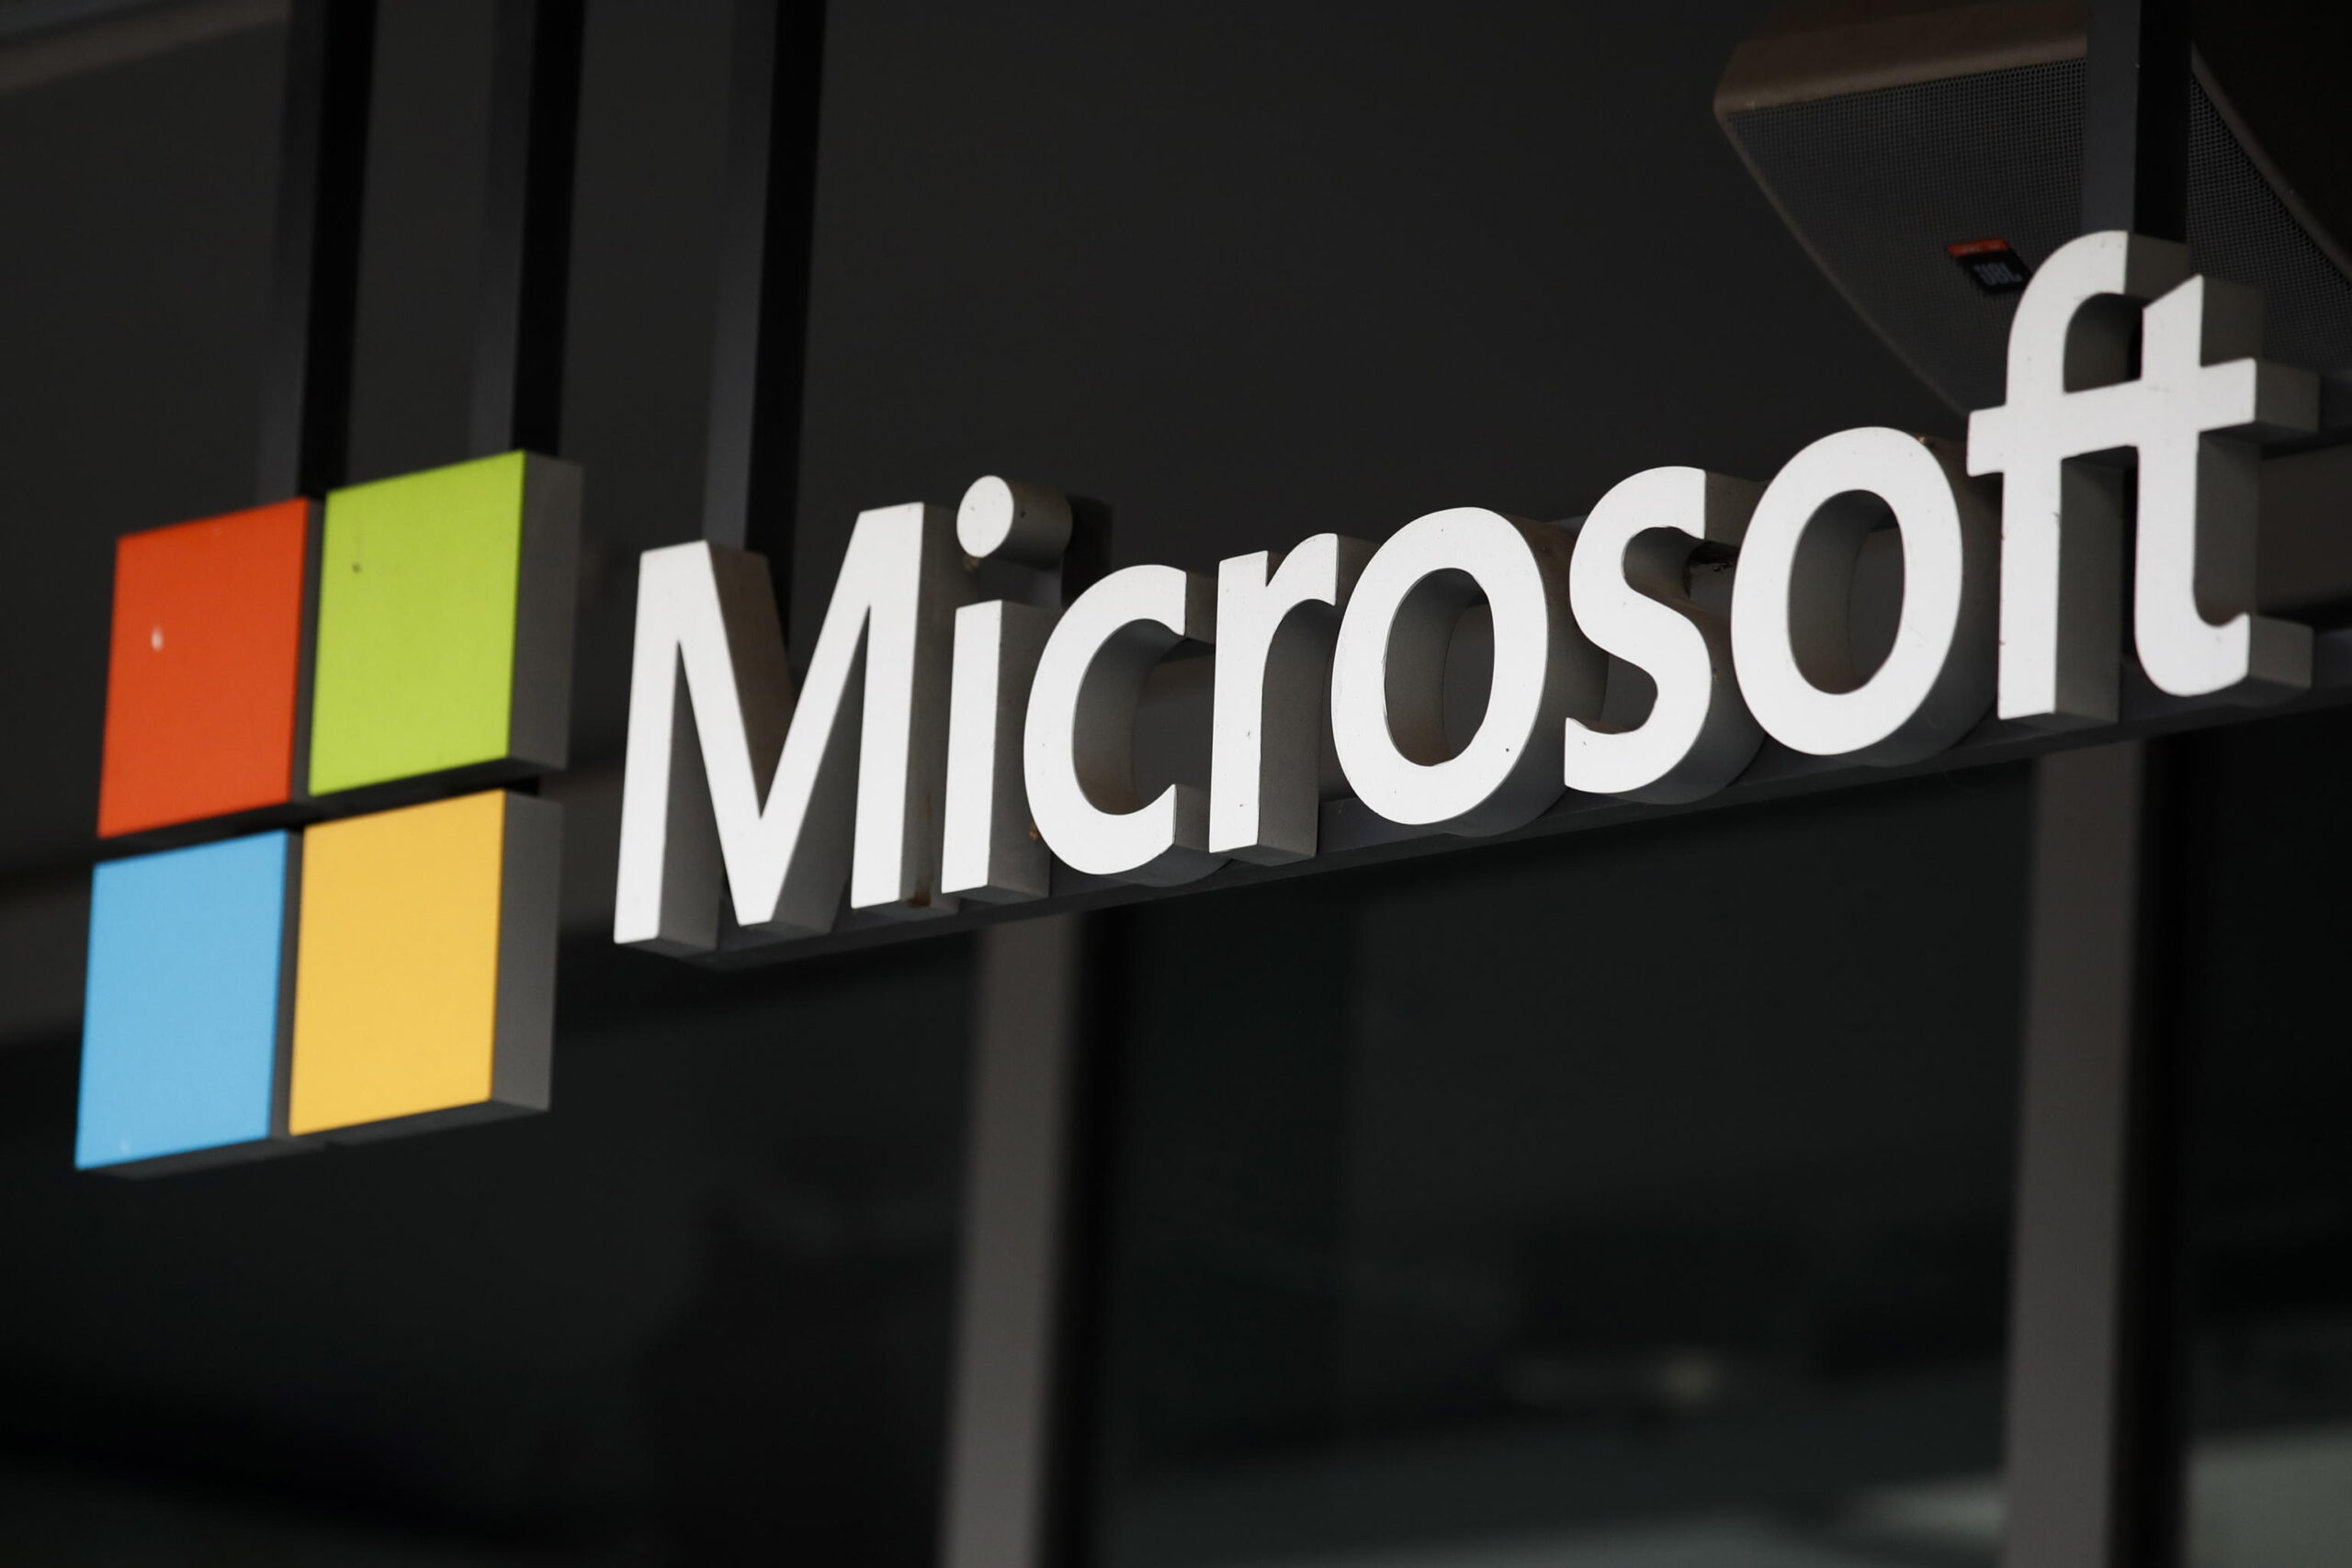 Microsoft crashes, global disruption of Outlook, Teams, and other company software